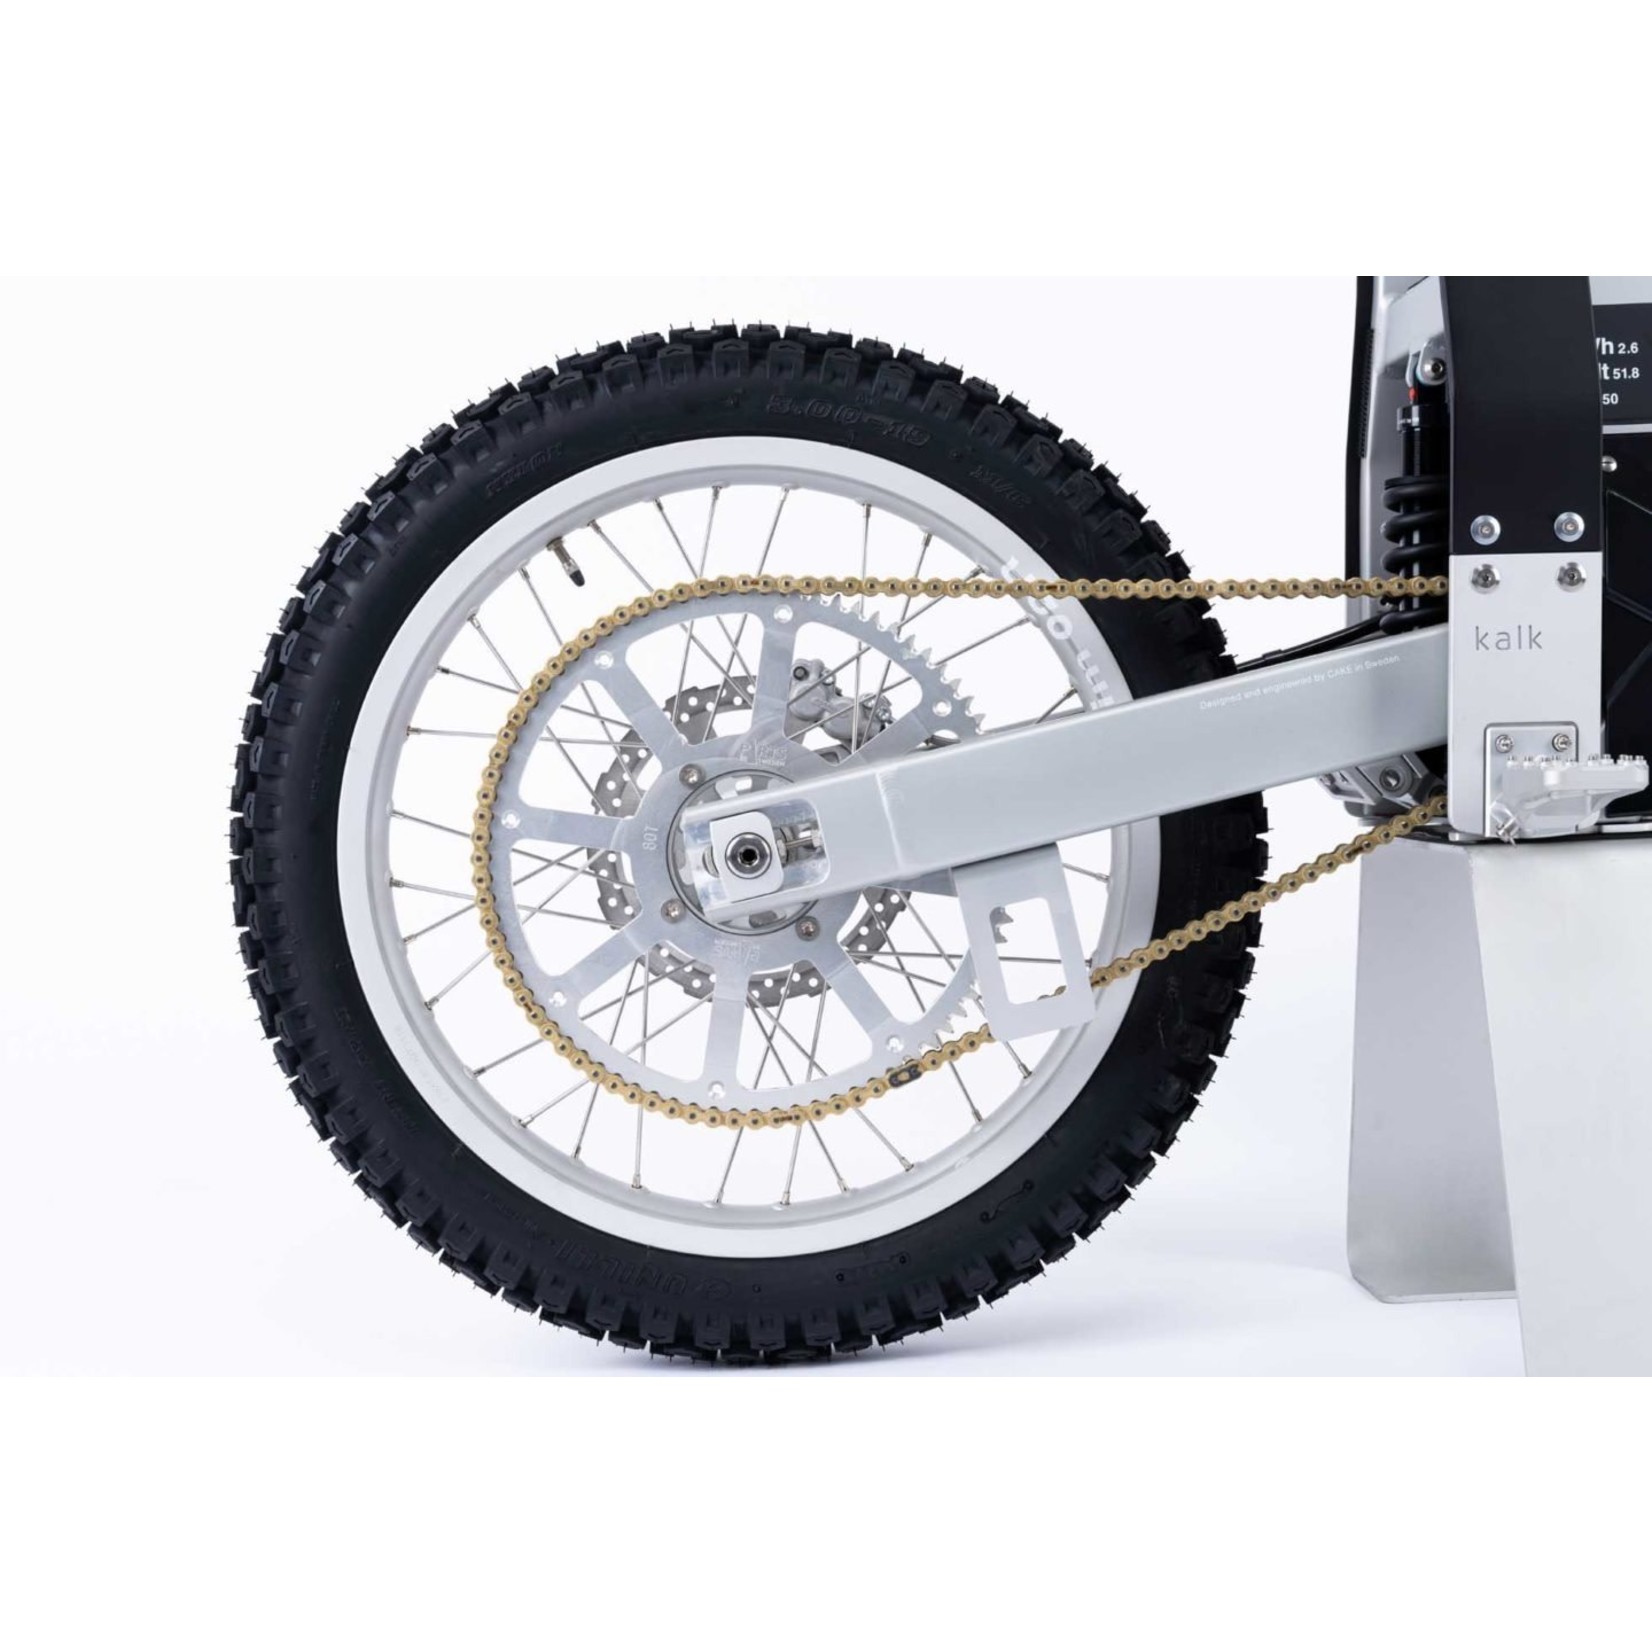 CAKE CAKE Kalk INK - Electric Motorbike (56mph / 3hours ride time)